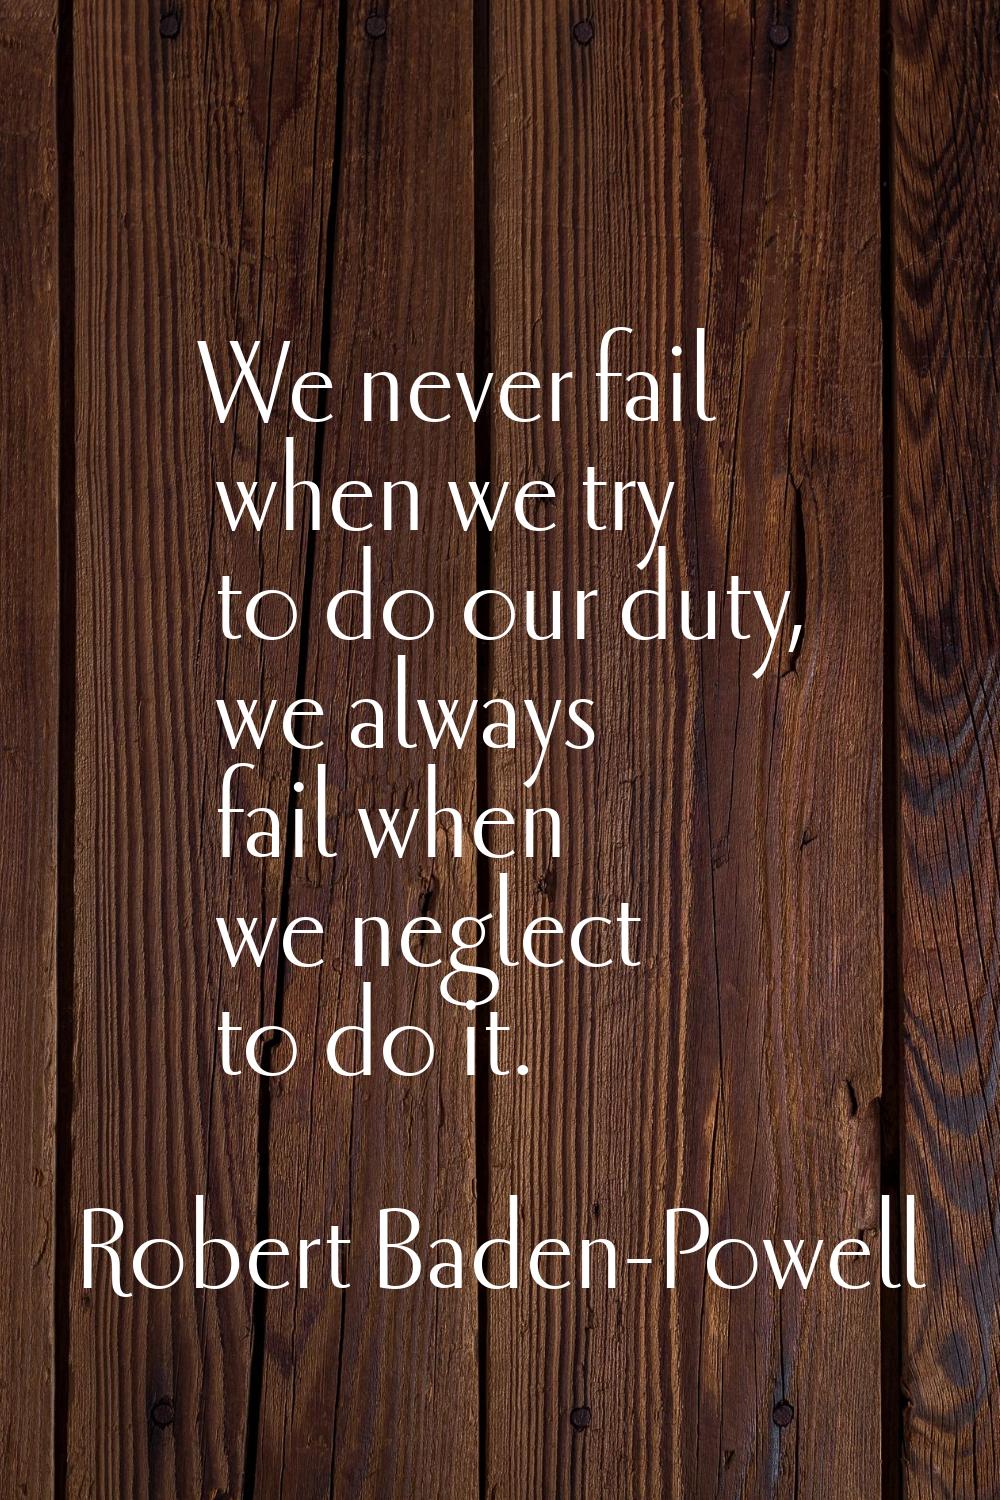 We never fail when we try to do our duty, we always fail when we neglect to do it.